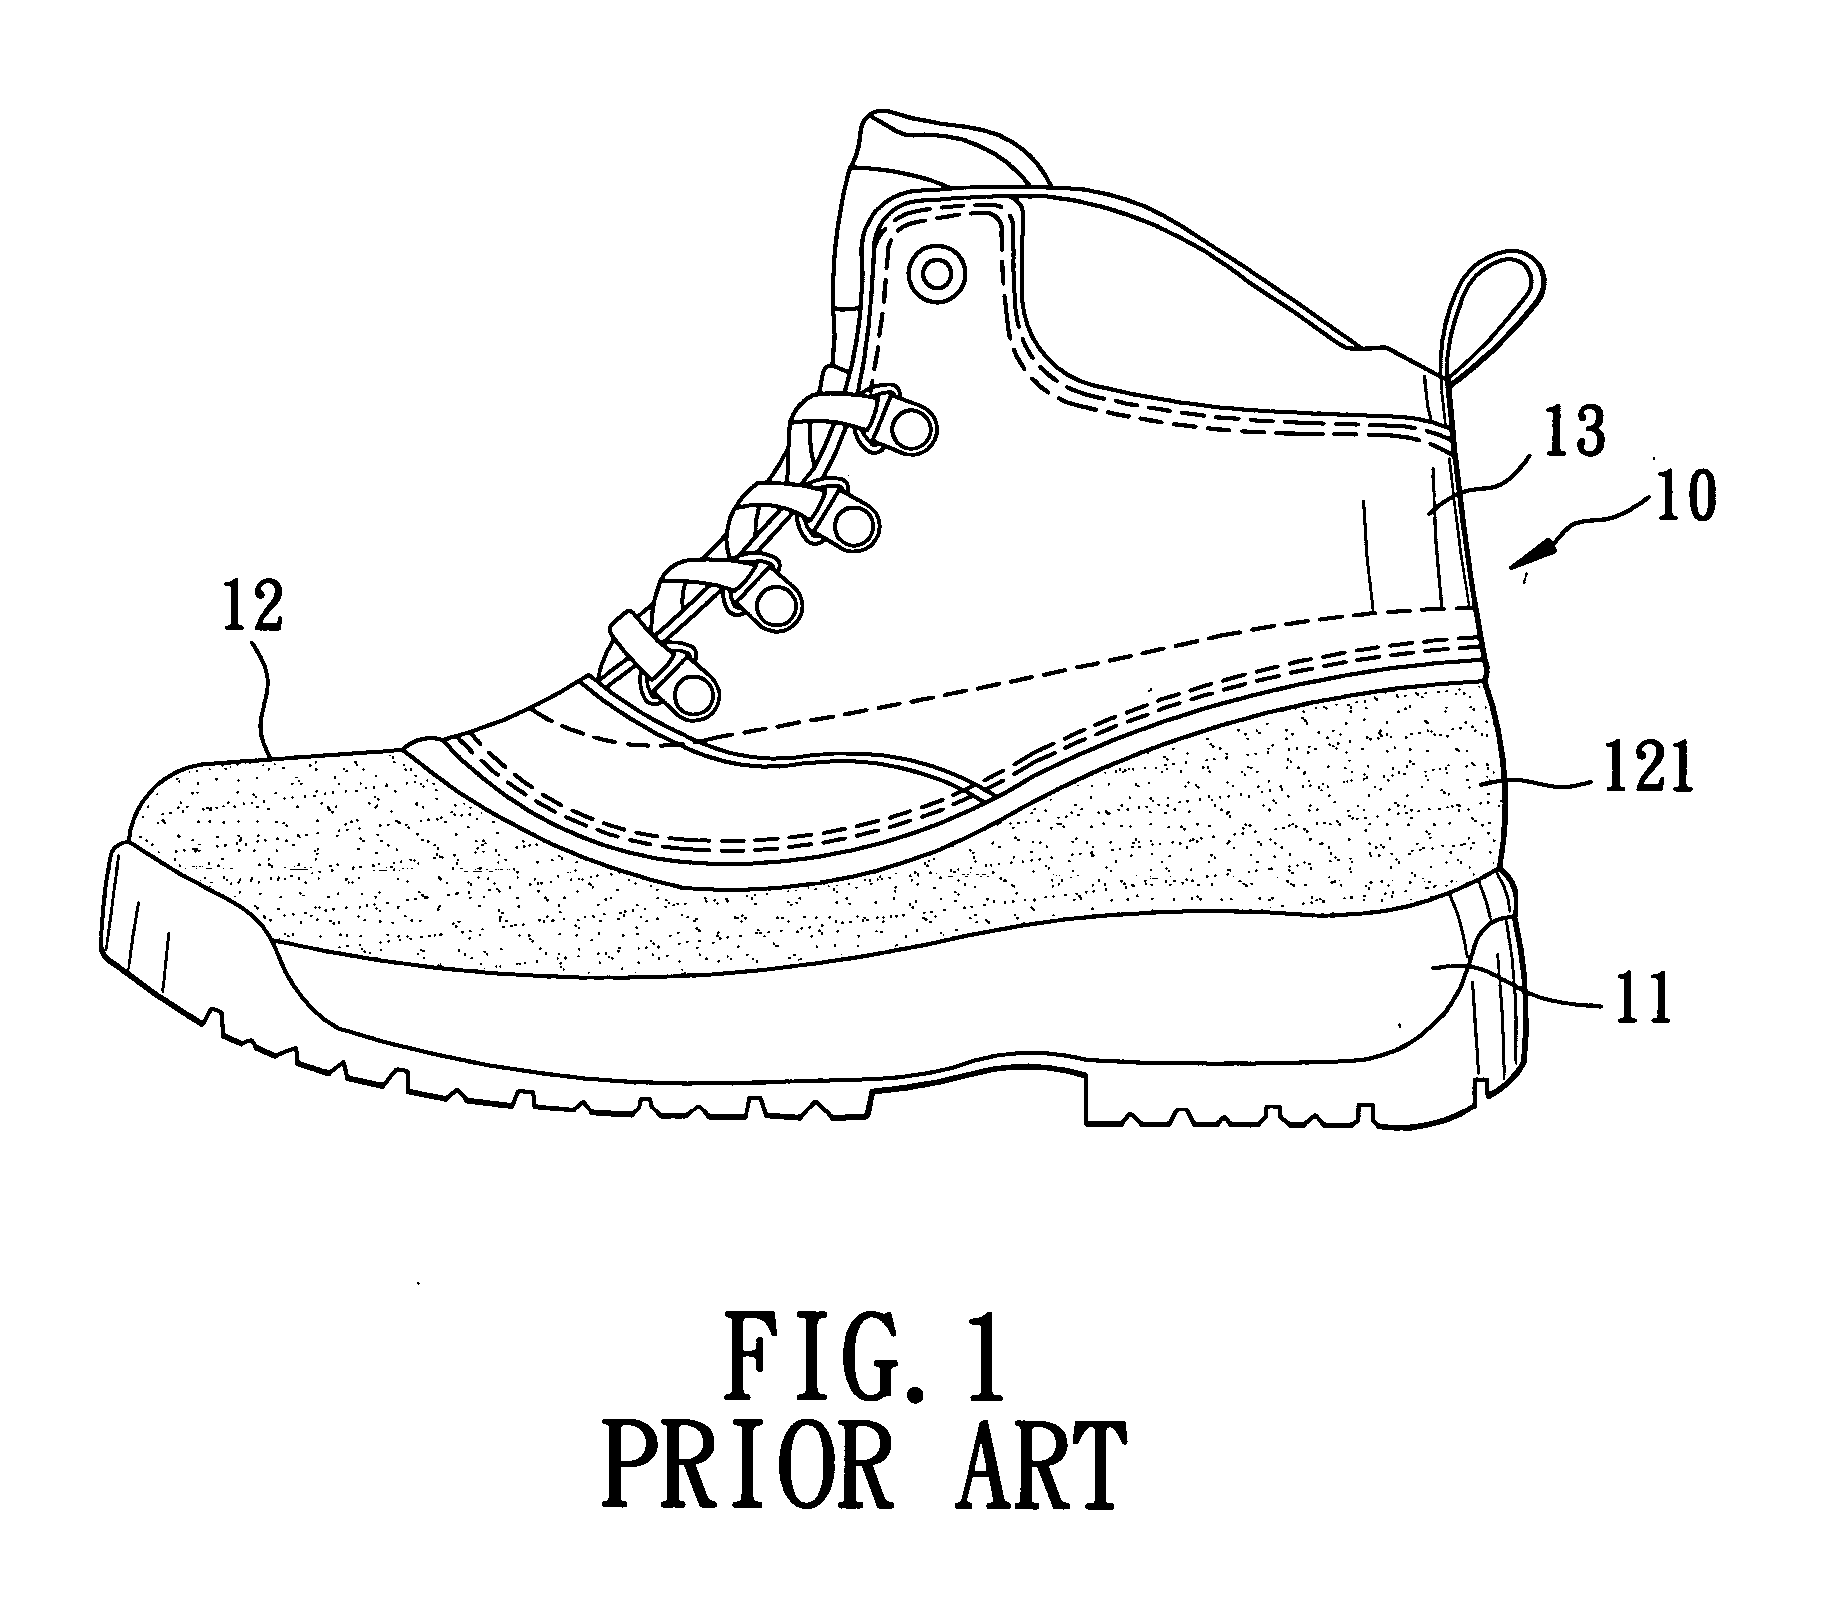 Shoe with shell portions